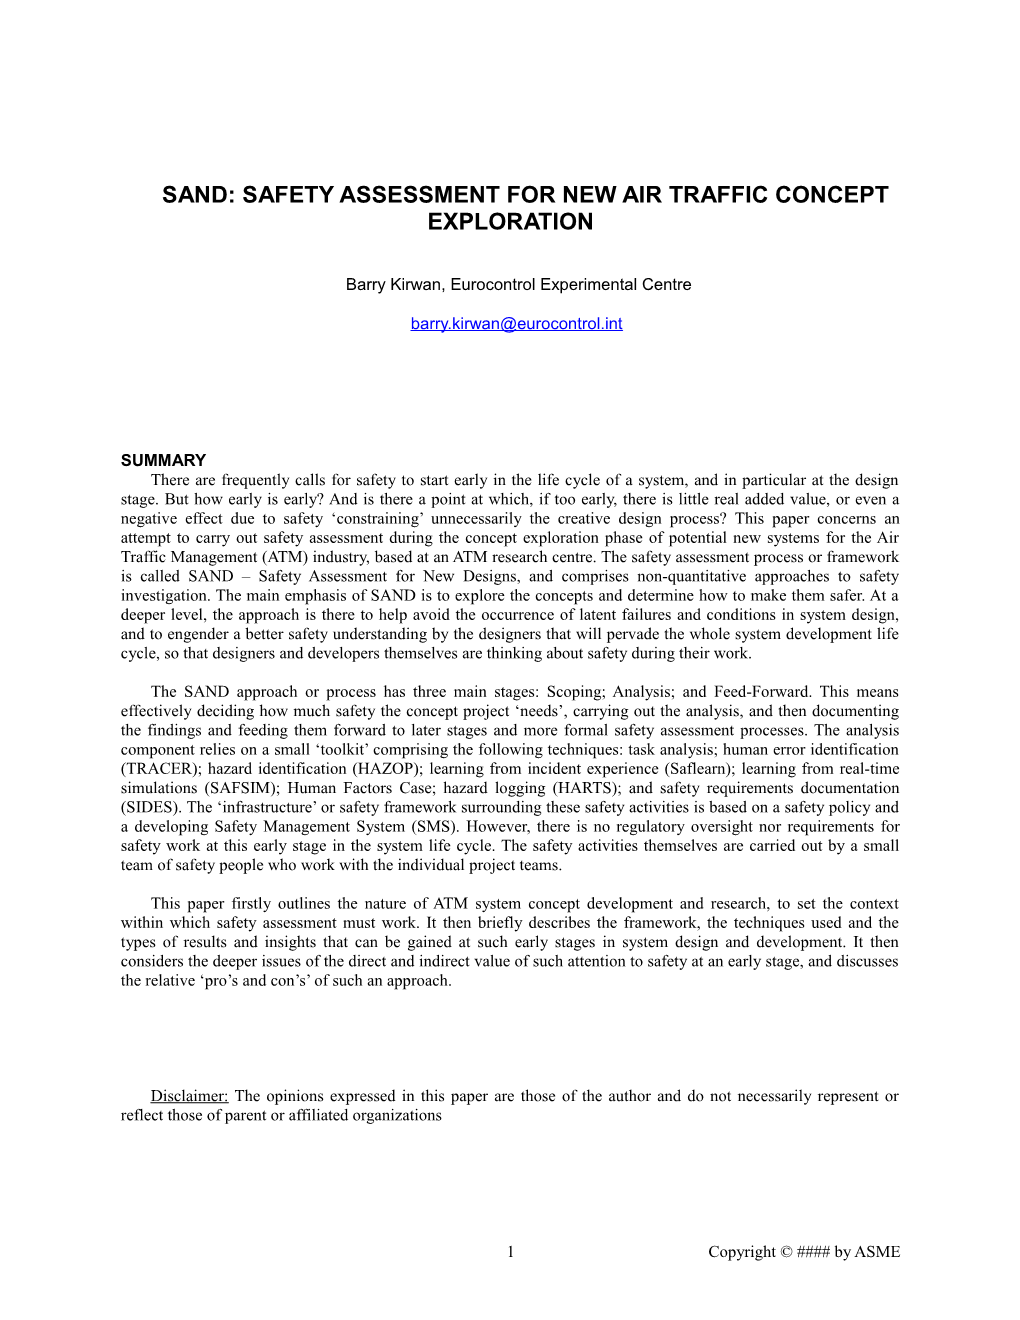 SAND: Safety Assessment for New Air Traffic Concept Exploration